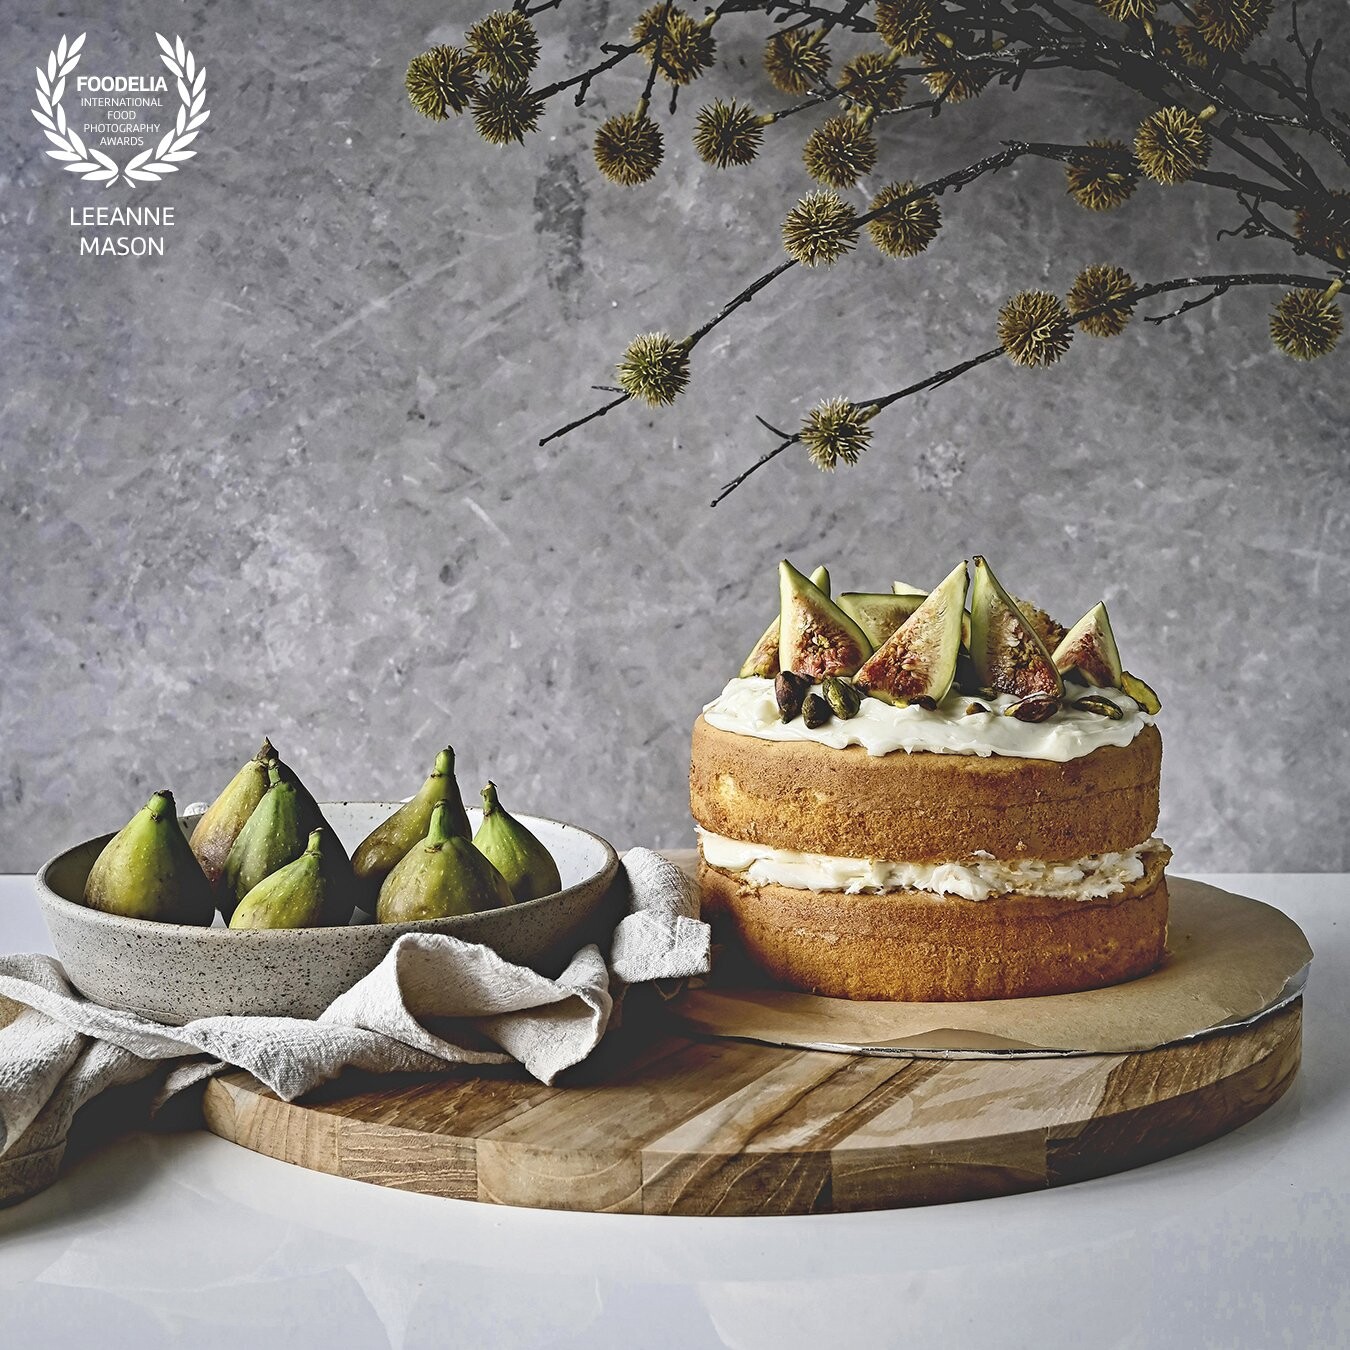 This image was taken during Fig season, I love the shape and texture of Figs, and wanted to highlight this delicious Fig and Pistachio Cake.  Using layers of wood, linen and textured background with a branch of foliage leaning into the frame adding interest.